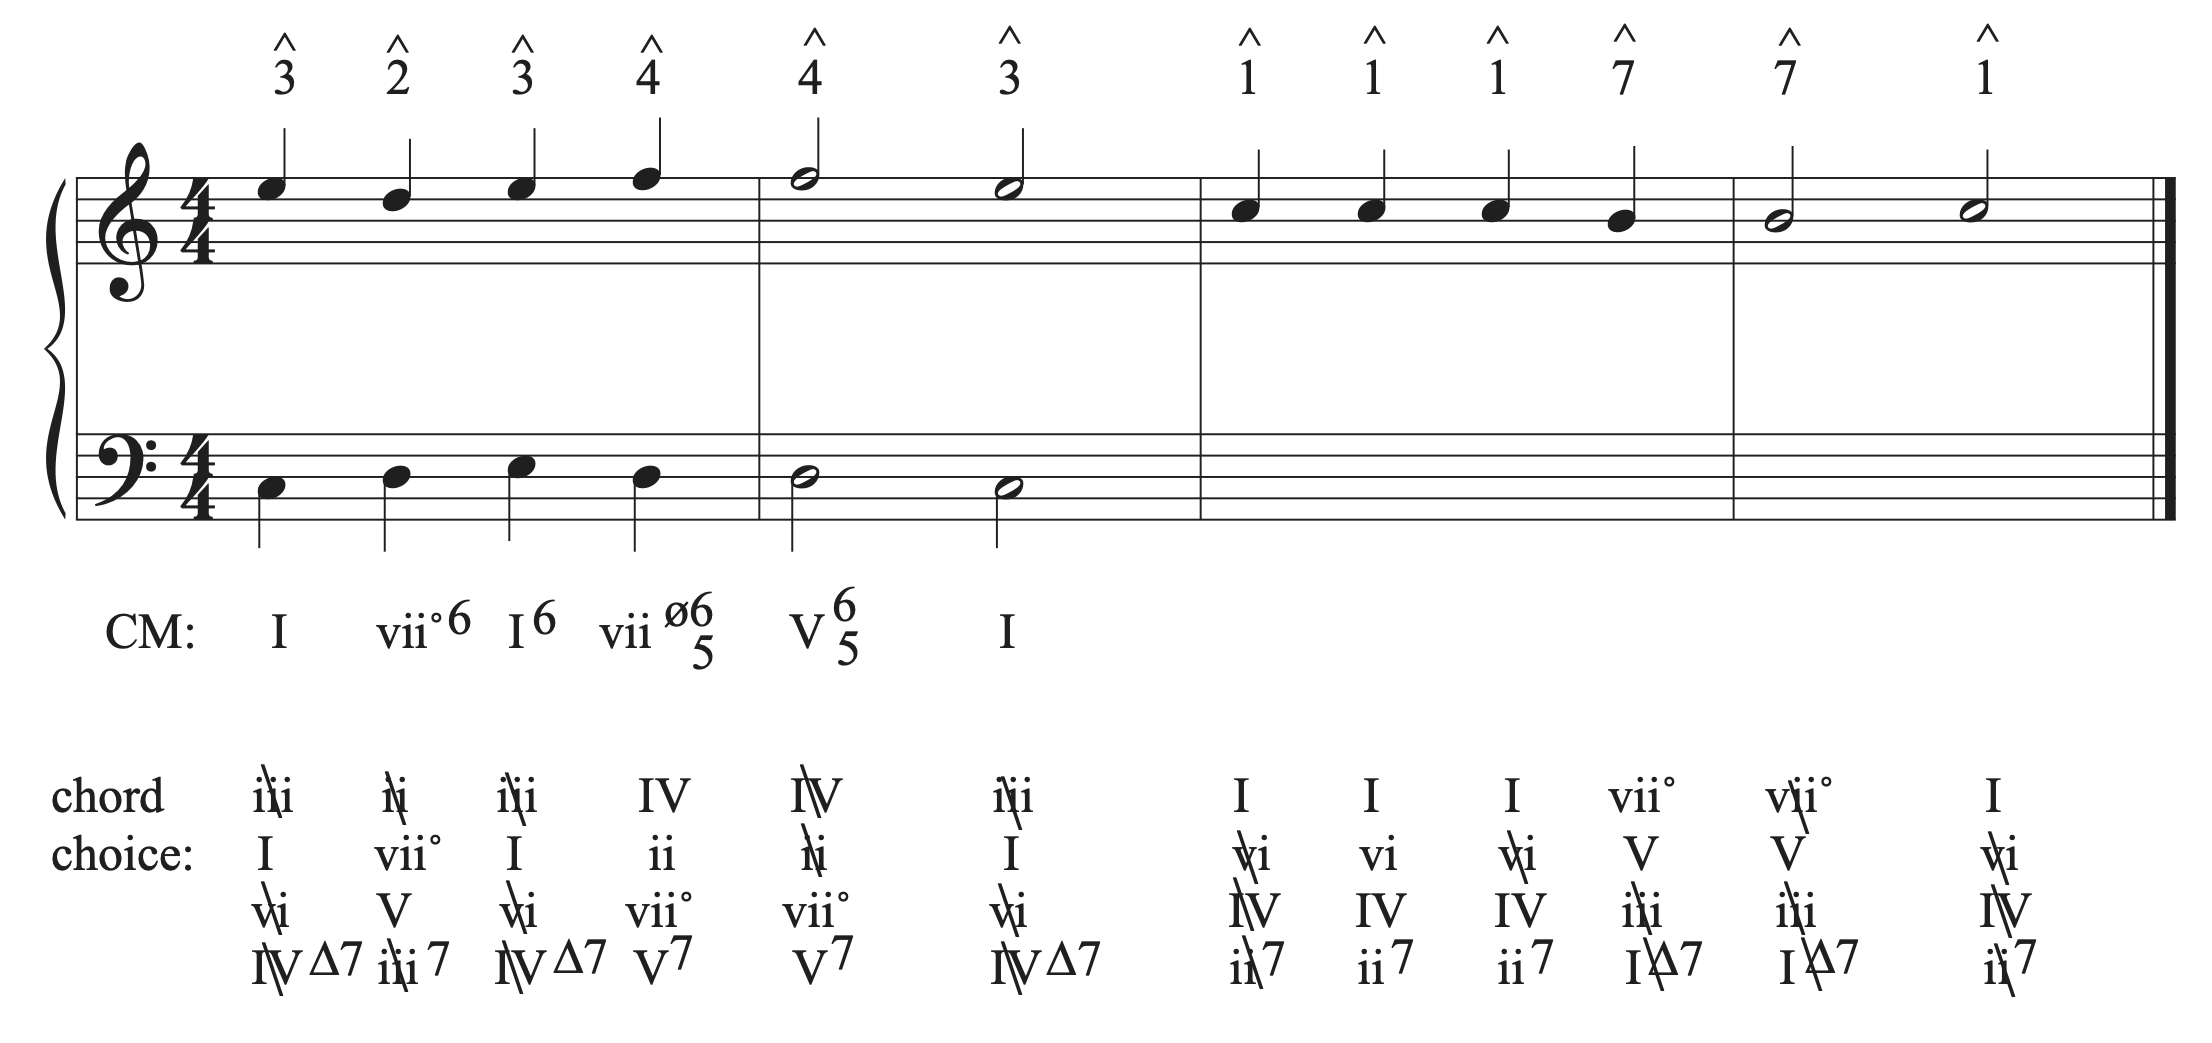 The musical example in C major with bars 1 to 2 added.